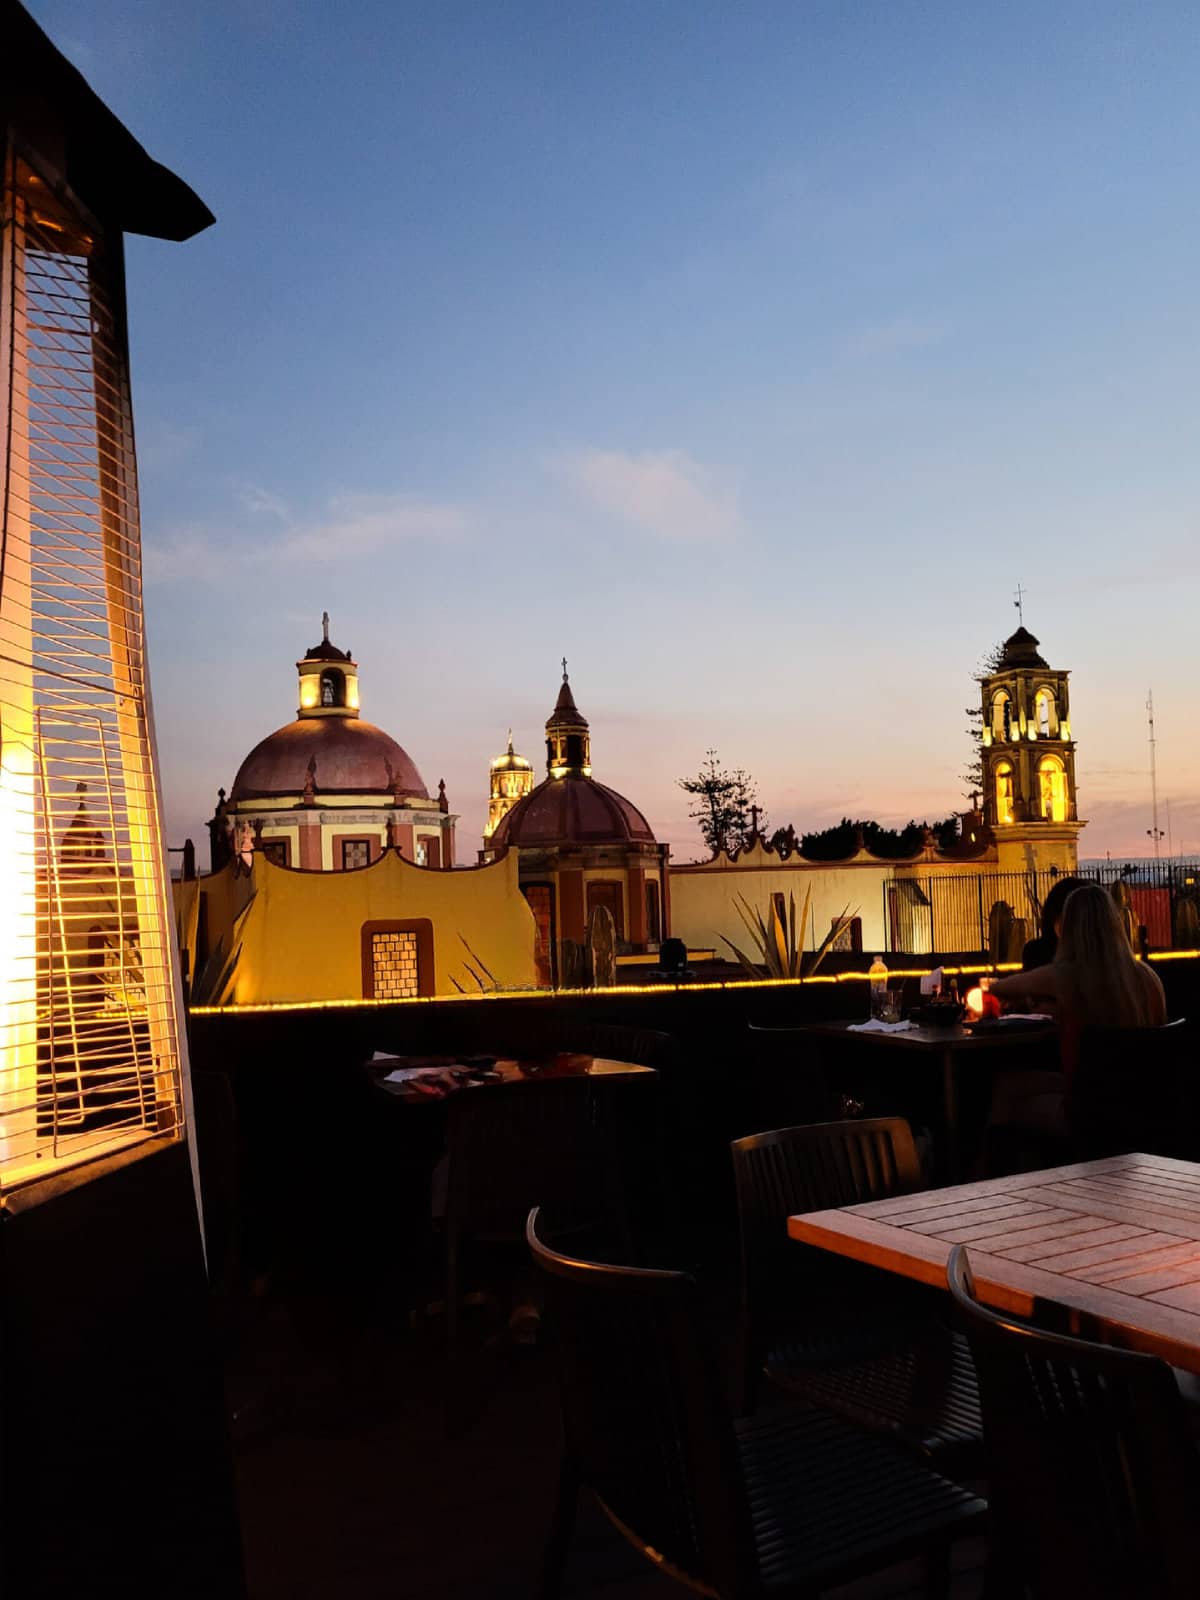 Catching a rooftop sunset in Queretaro is one of the best things to do at night.